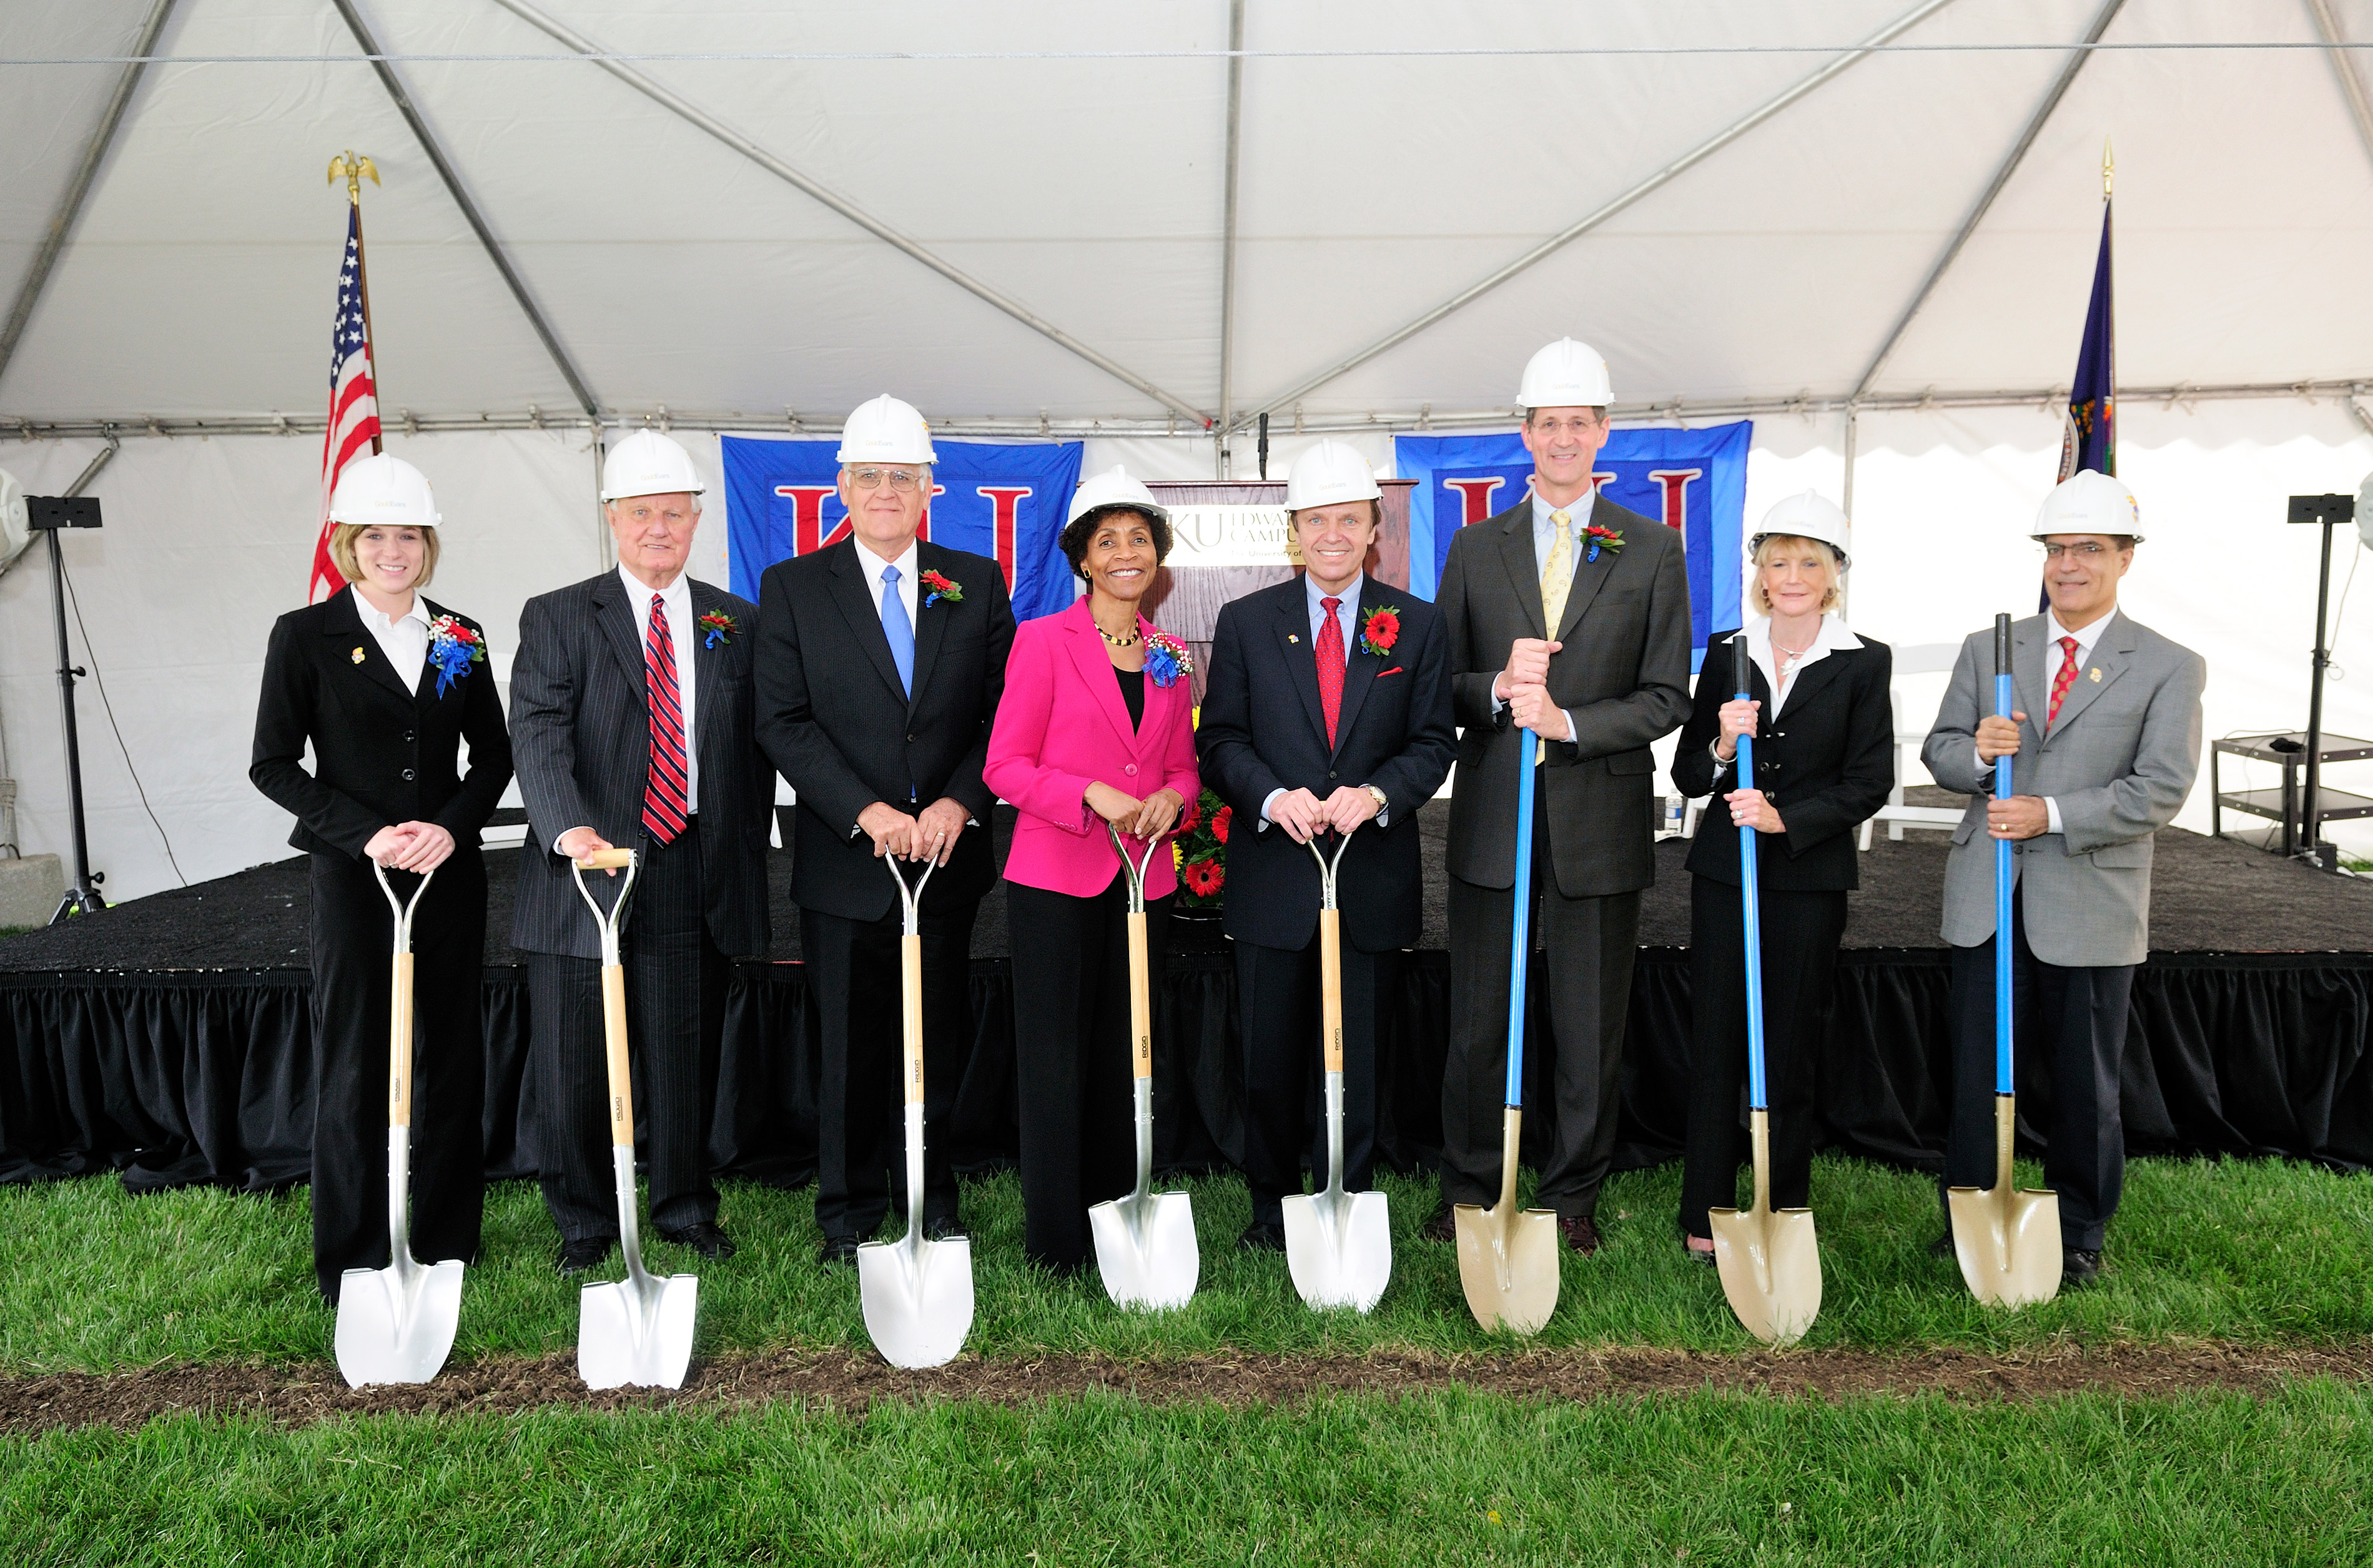 Robert Clark (fourth from right) joins former KU Chancellor Bernadette Gray-Little (fourth from left) and local leaders to break ground on the BEST Building on the KU Edwards Campus in 2010.